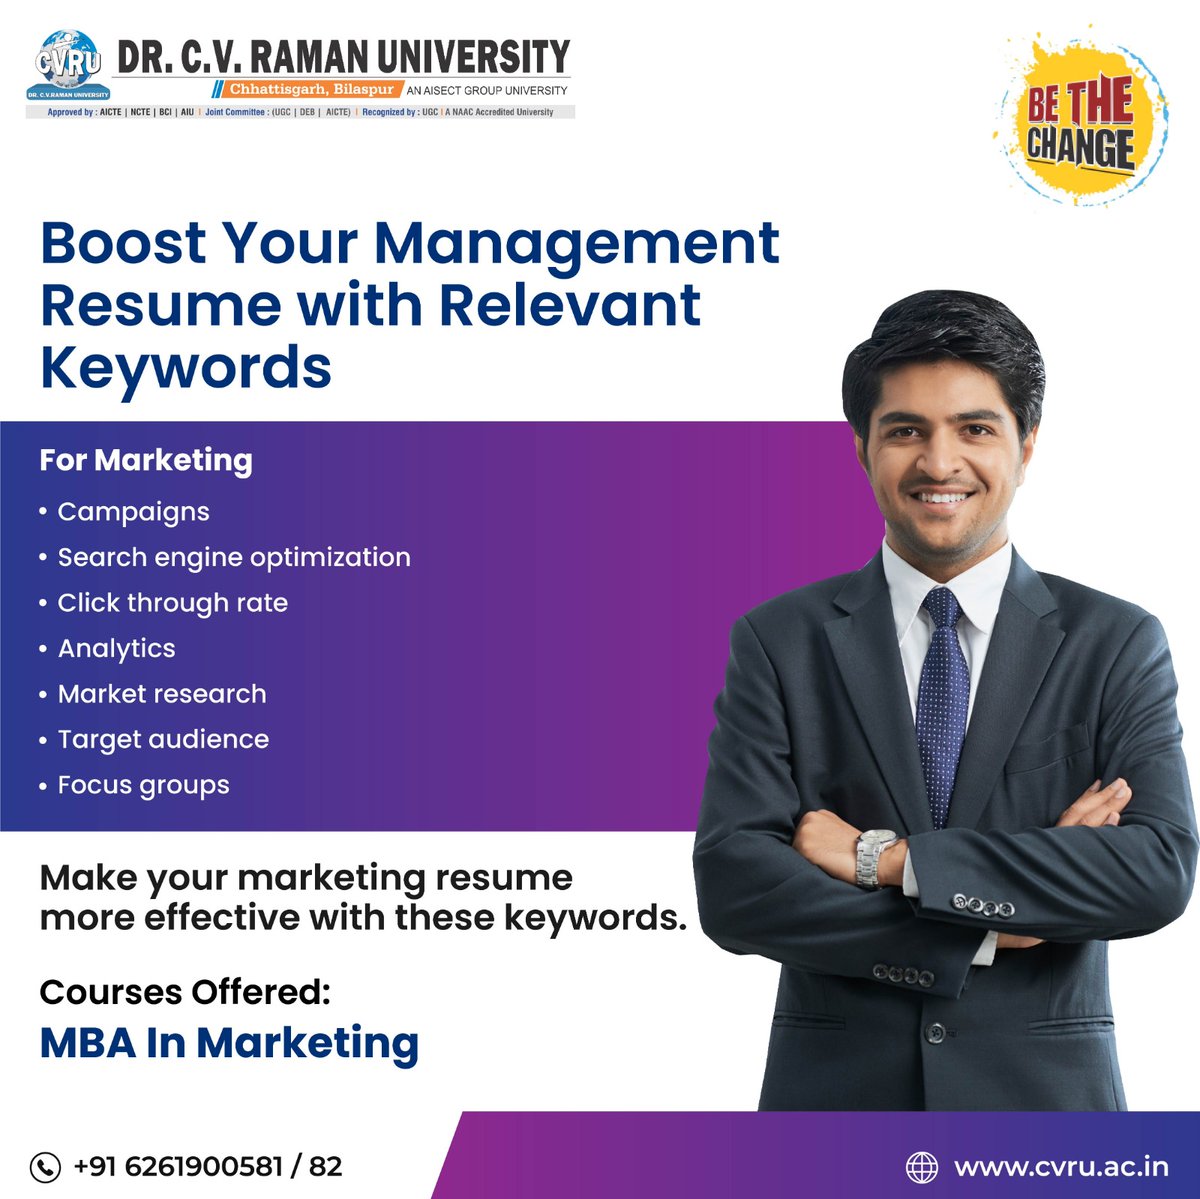 Elevate your marketing game with these key skills!  Enhance your resume with expertise in campaigns, SEO, CTR, analytics, market research, and focus groups. Pursue an MBA in Marketing for further advancement. Apply now and stand out in the competitive marketing landscape!